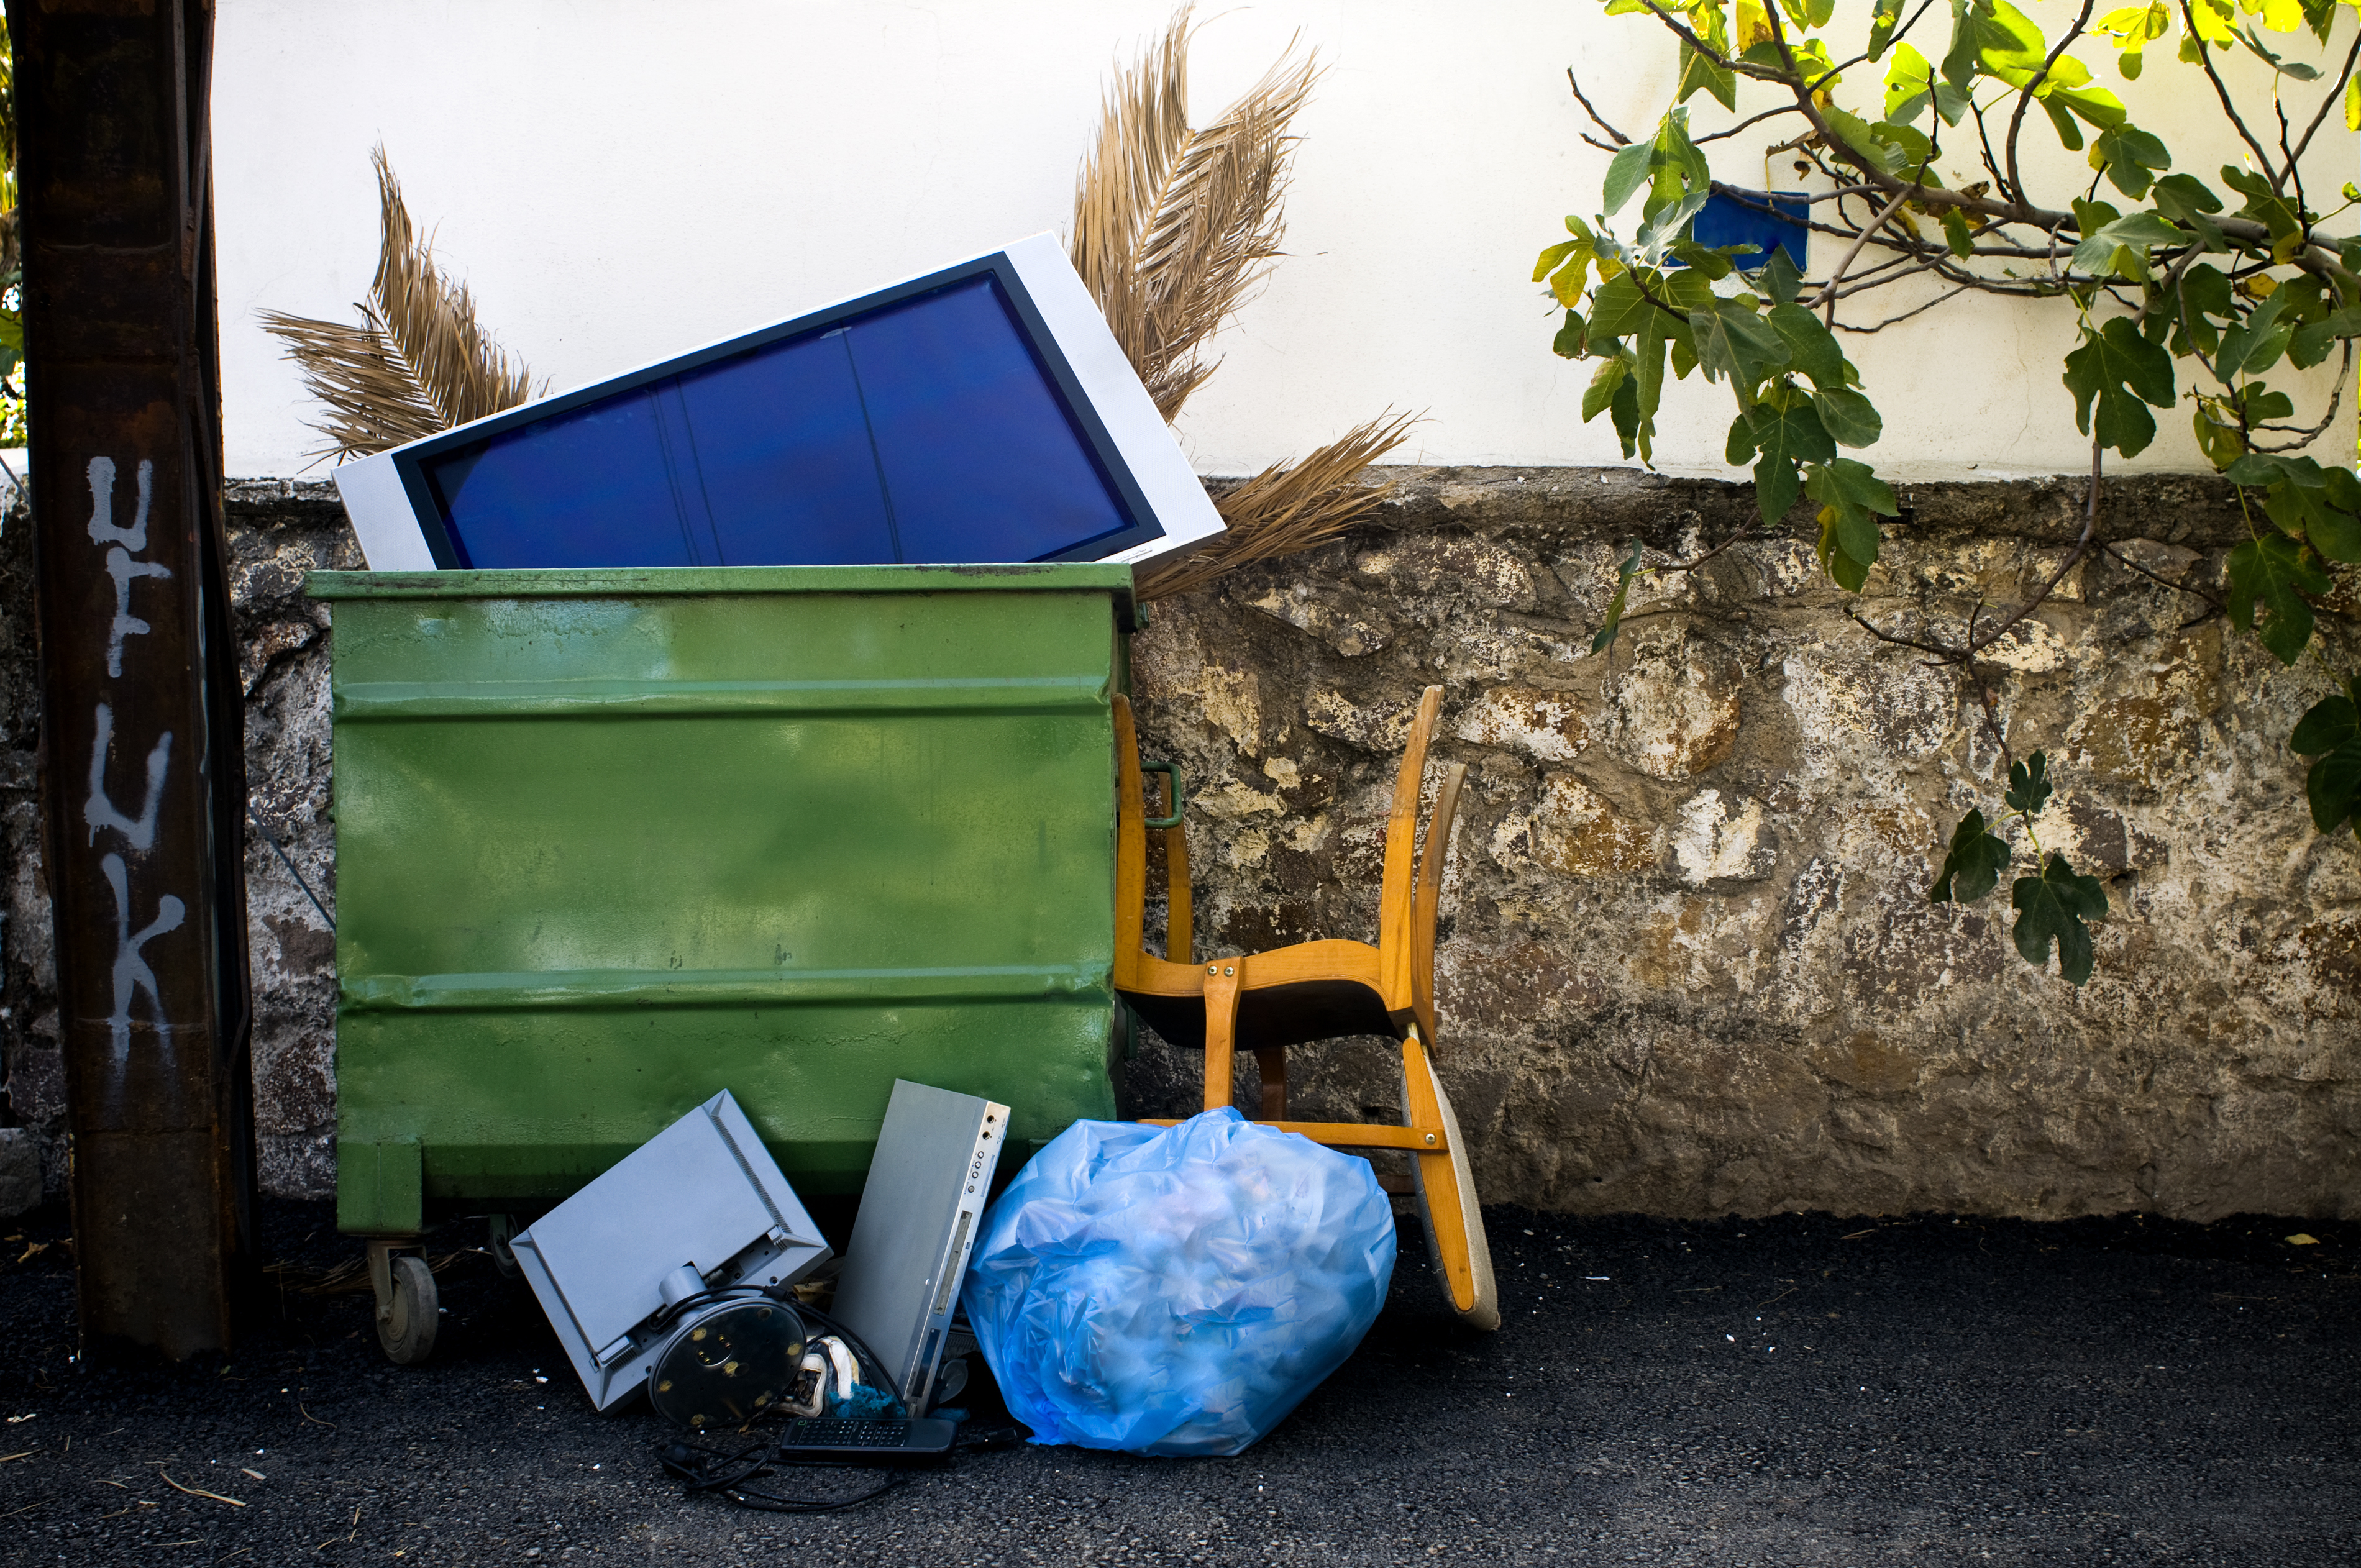 Overturned green dumpster with electronic waste and a blue bag, next to a wall and under a tree